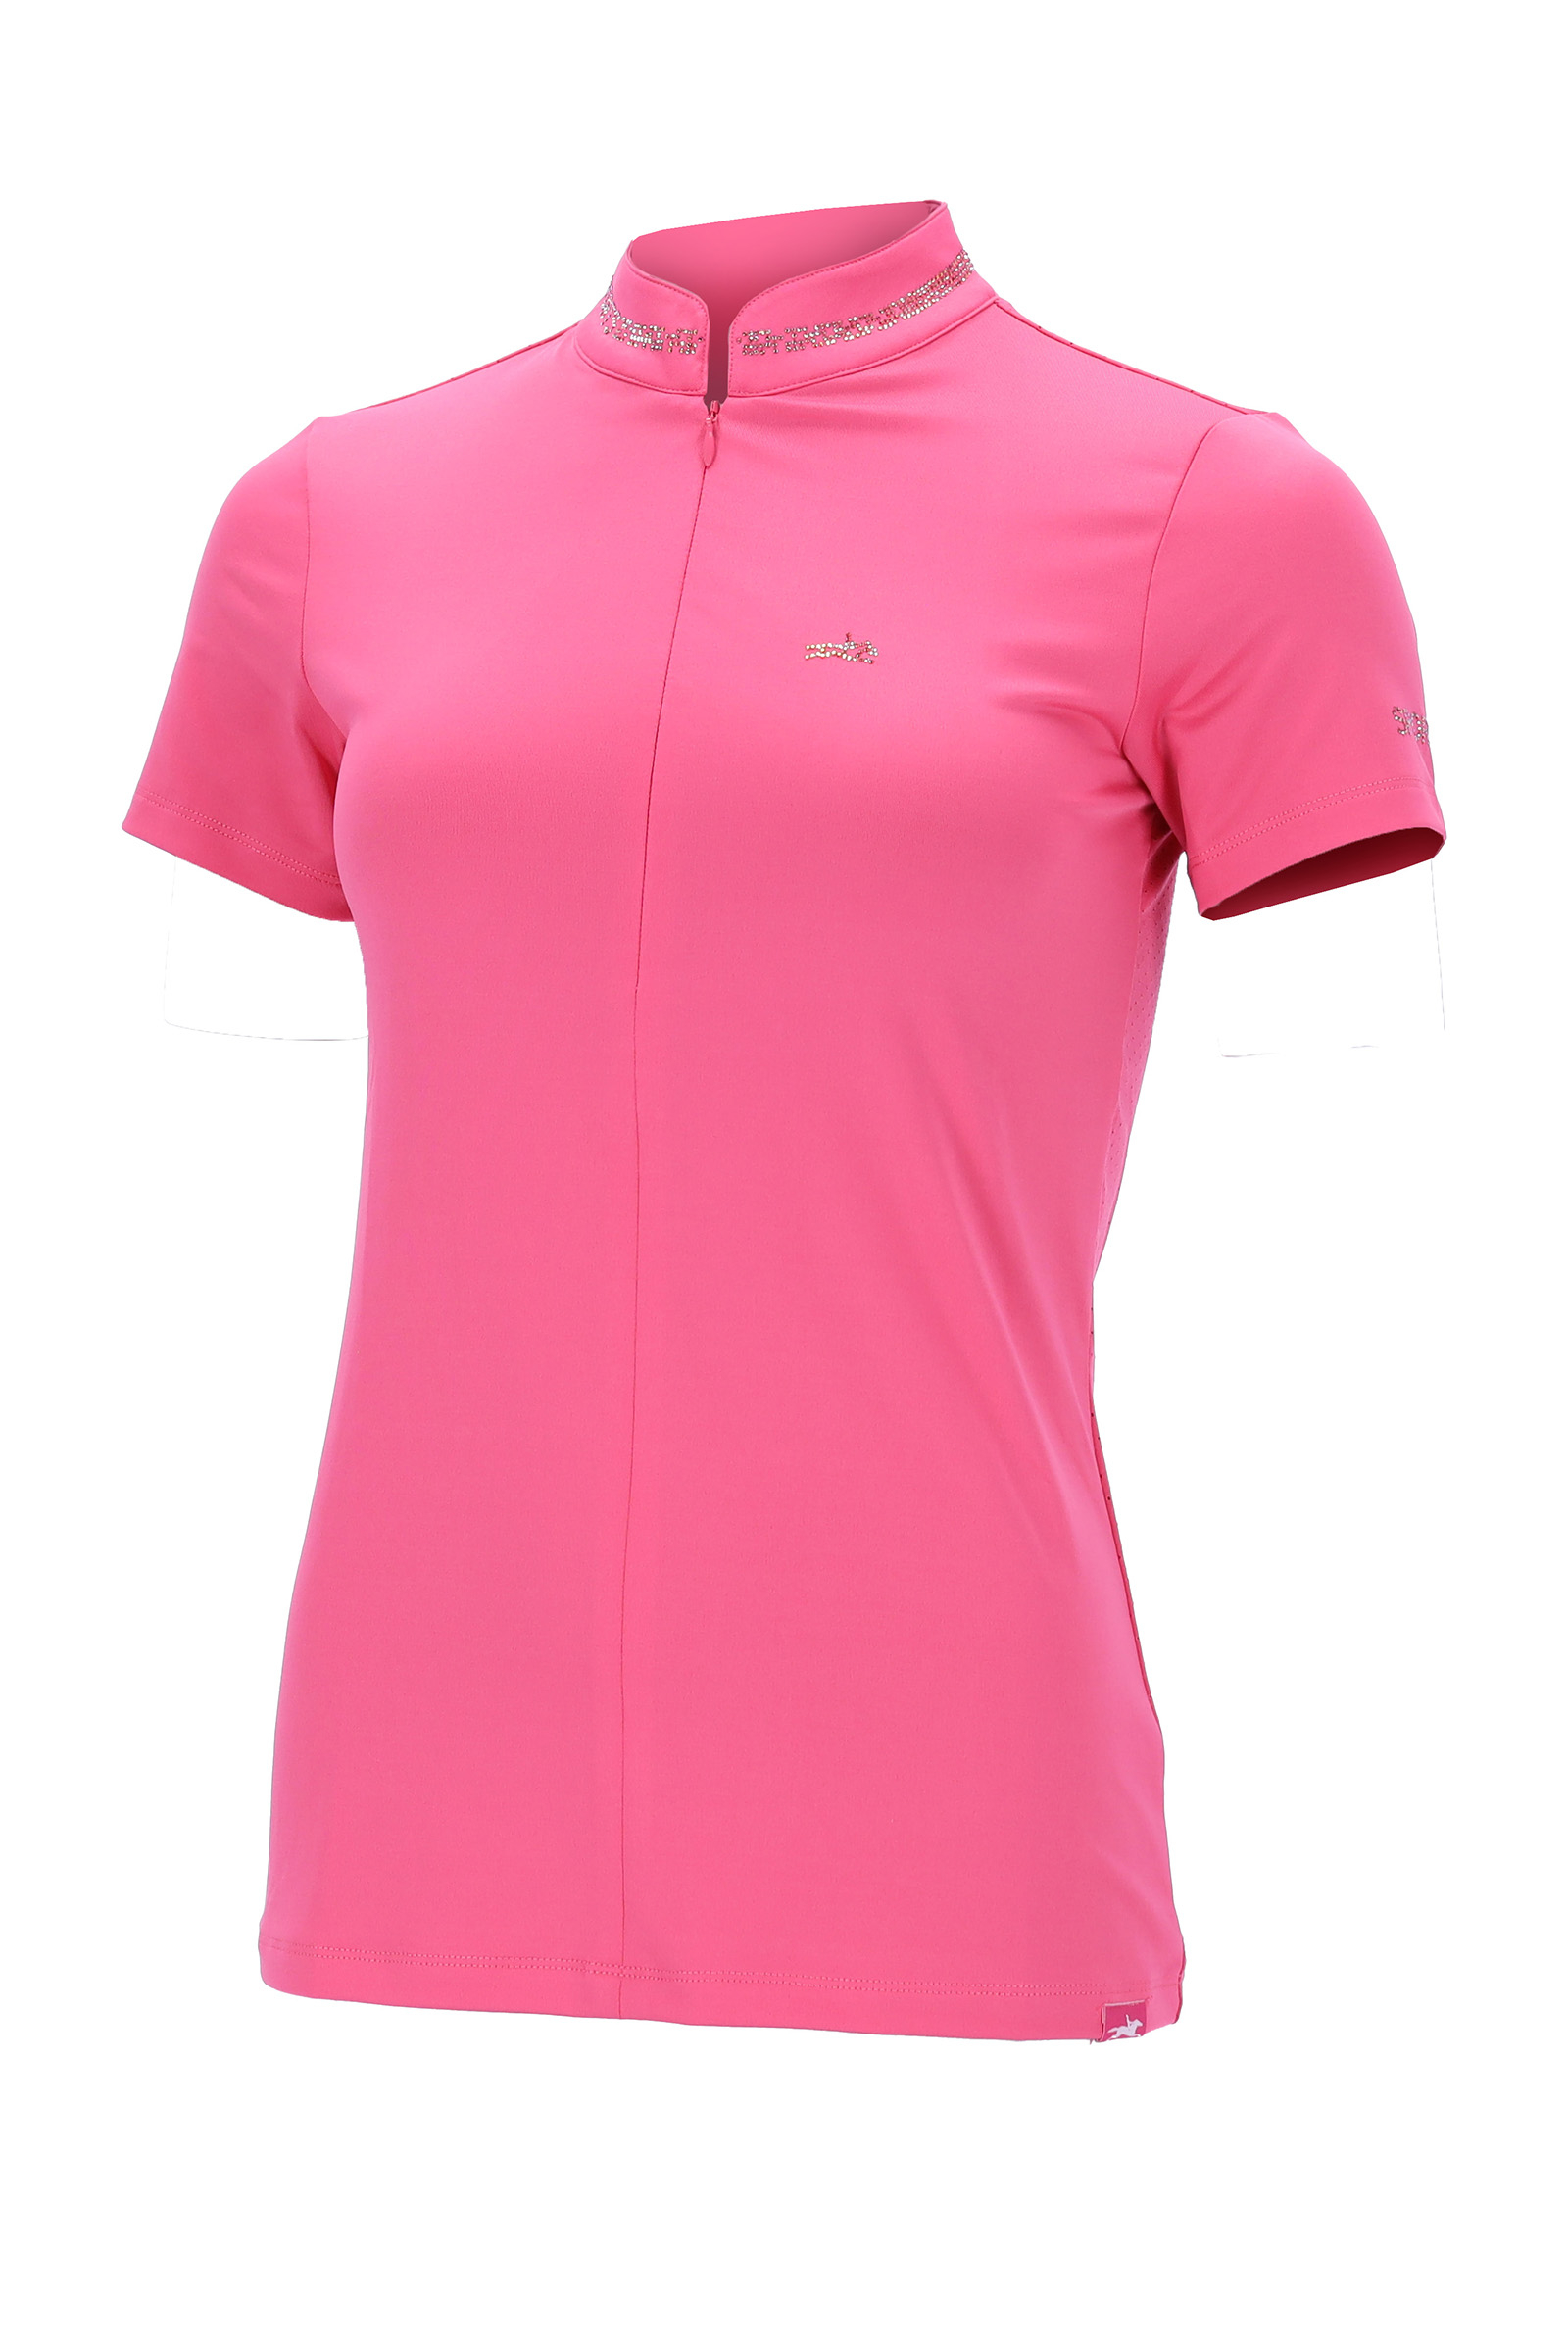 Buy Schockemöhle Summer Women's Page Style Technical Shirt